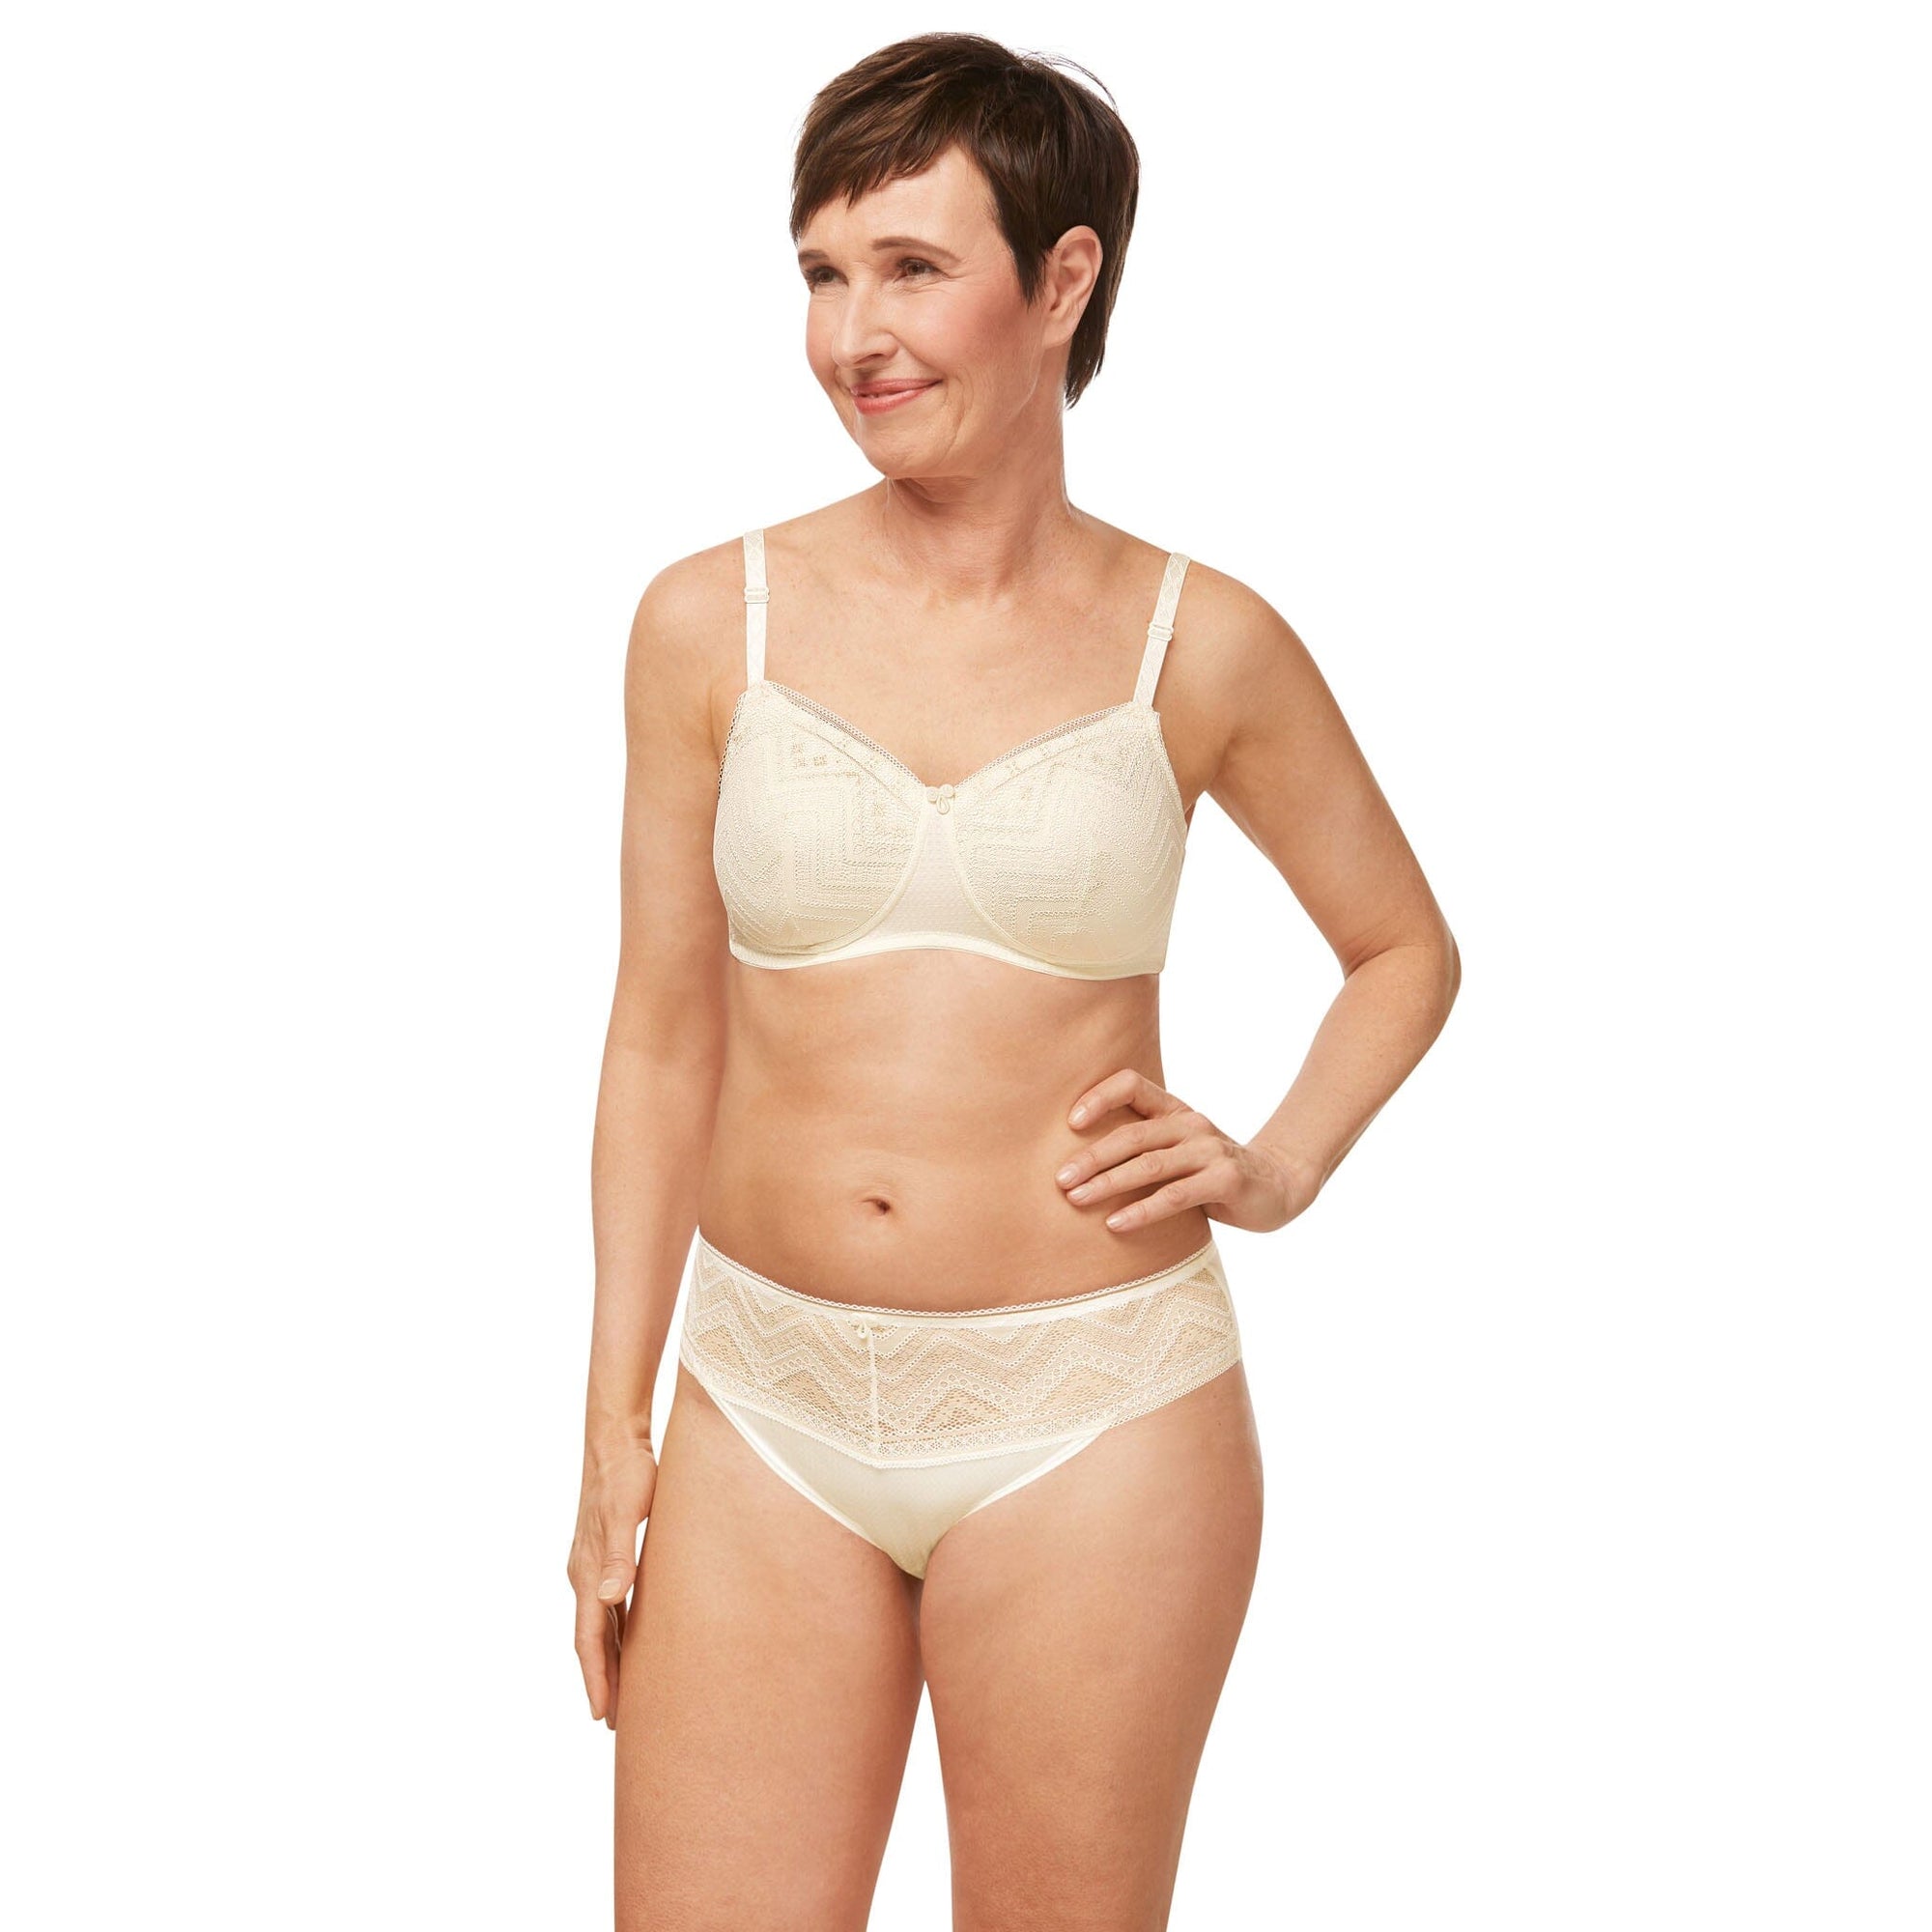 Panty shown in Off White/Light Beige pairs with matching Bras (#9232, #9233, #9234), sold separately